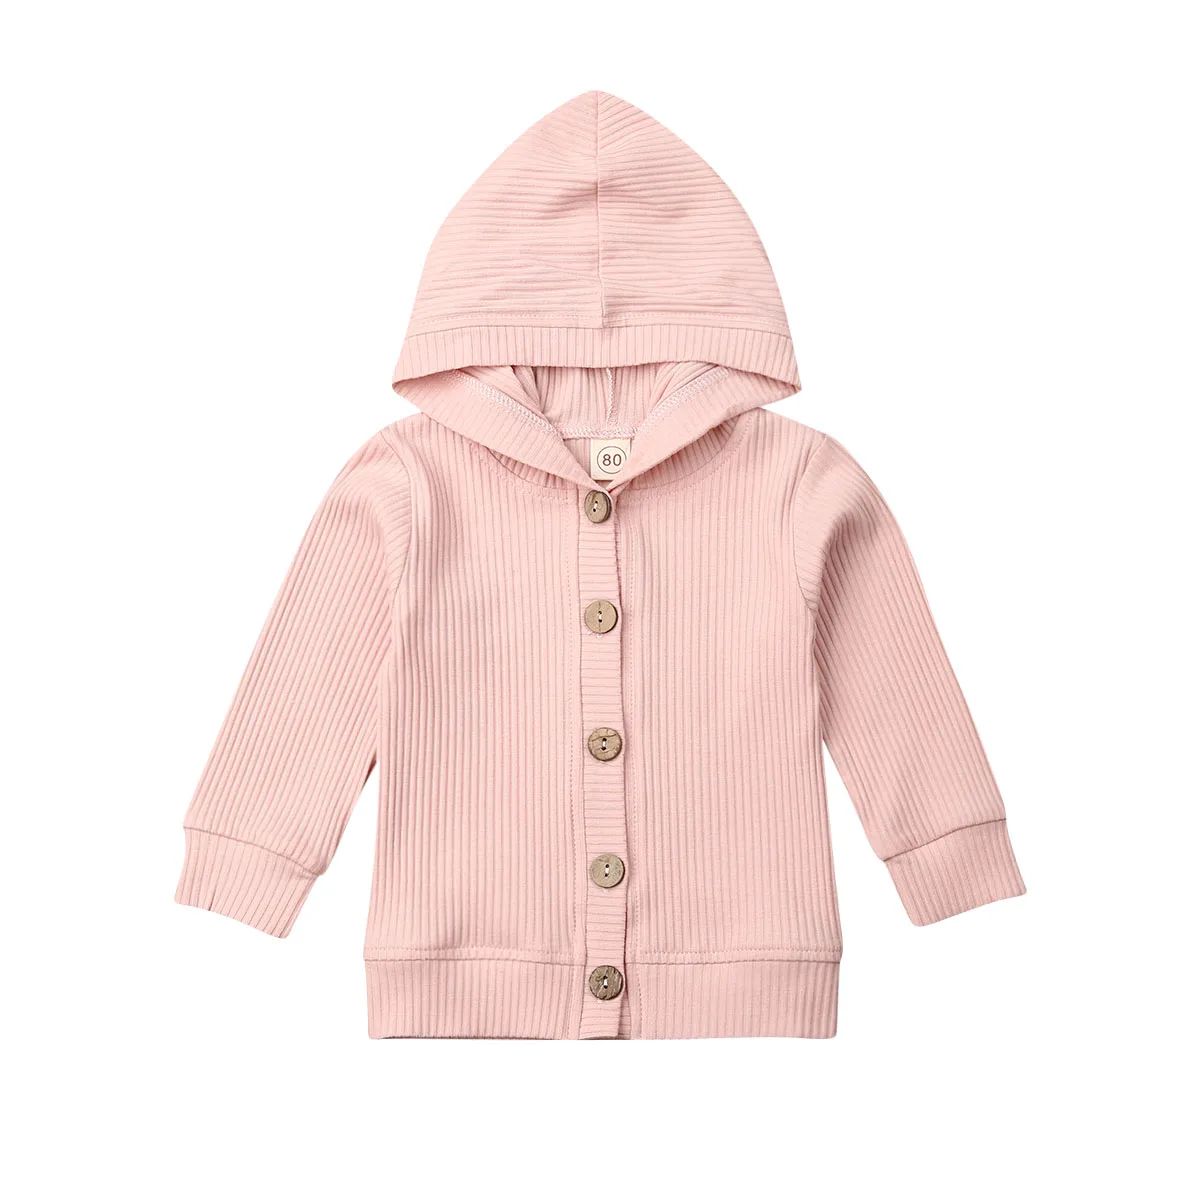 Baby Sweaters Autumn Infant Baby Girl Clothes Long Sleeve Knitted Coat Jacket Outwear Tops - Цвет: Розовый